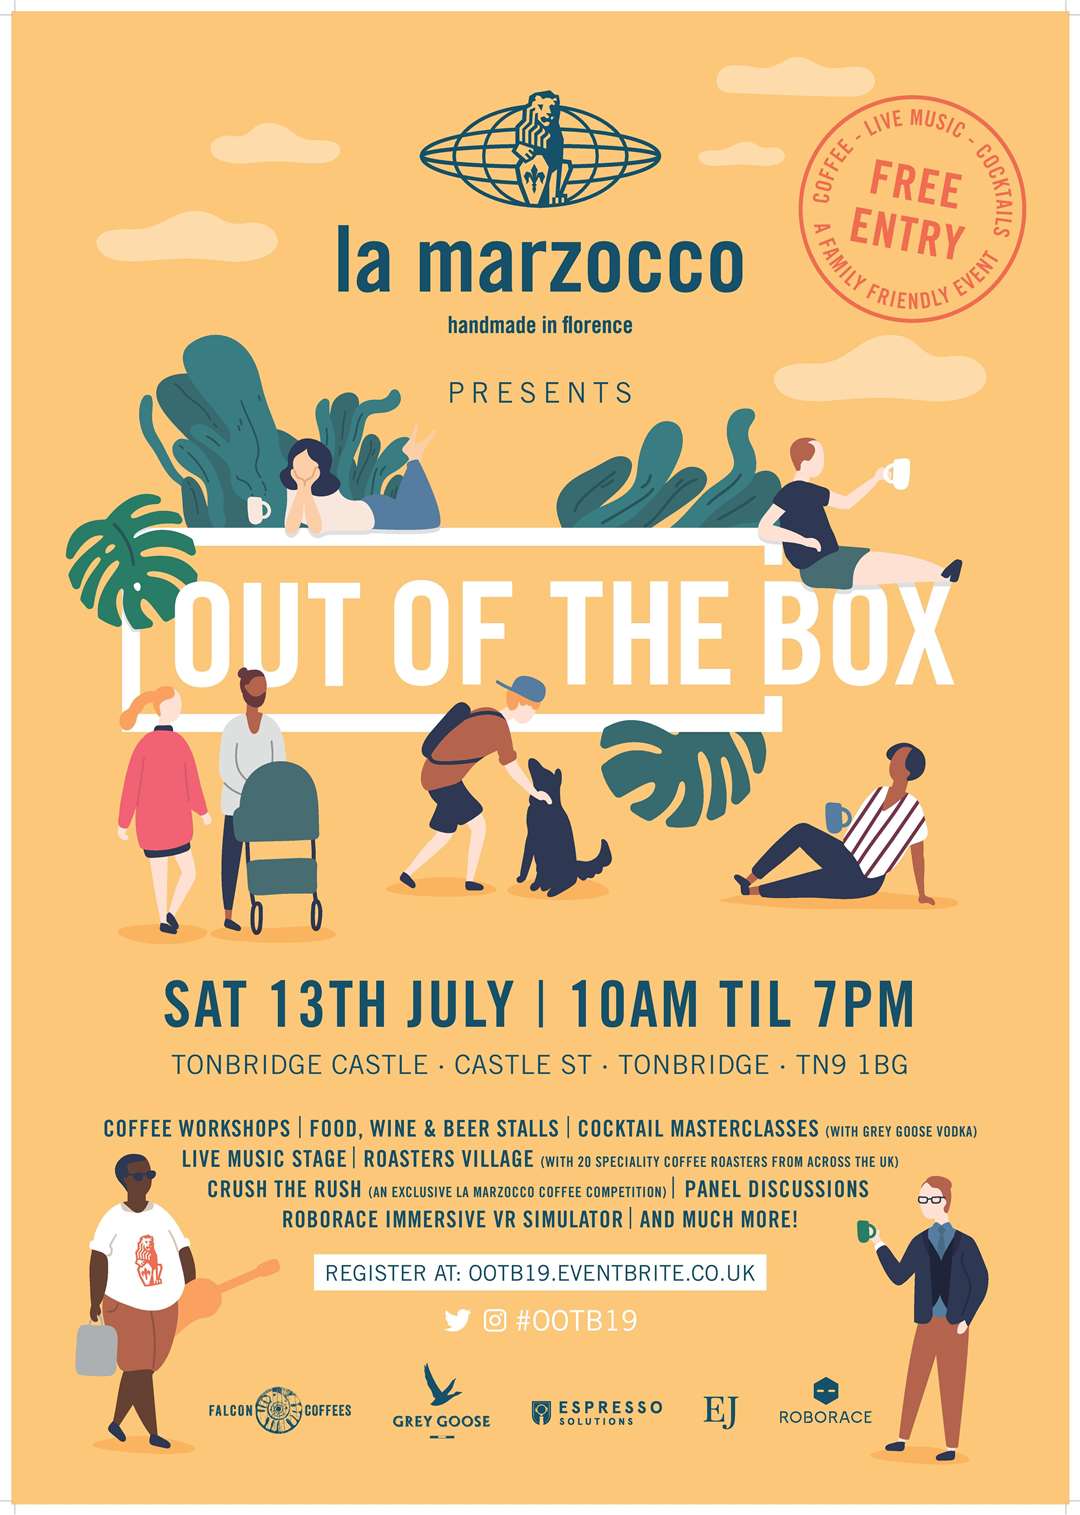 There are so many different things to see and do at La Marzocco's Out of the Box Coffee Festival!